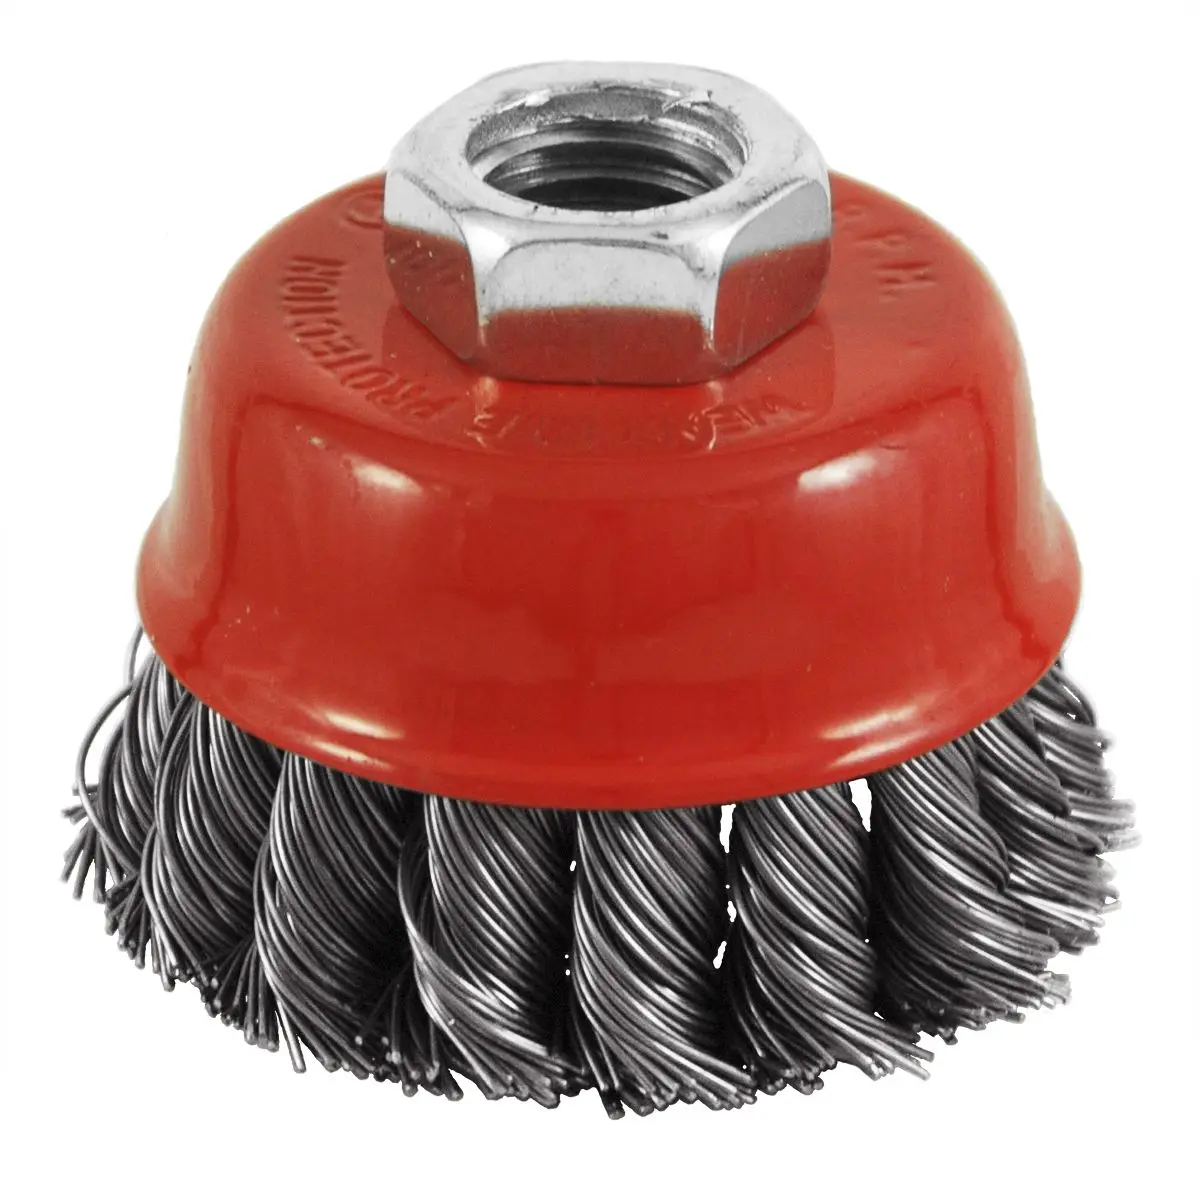 Wheel cup brushes steel wire industrial weeding twist brush Grass Trimmer Lawn Mower Accessories Tool